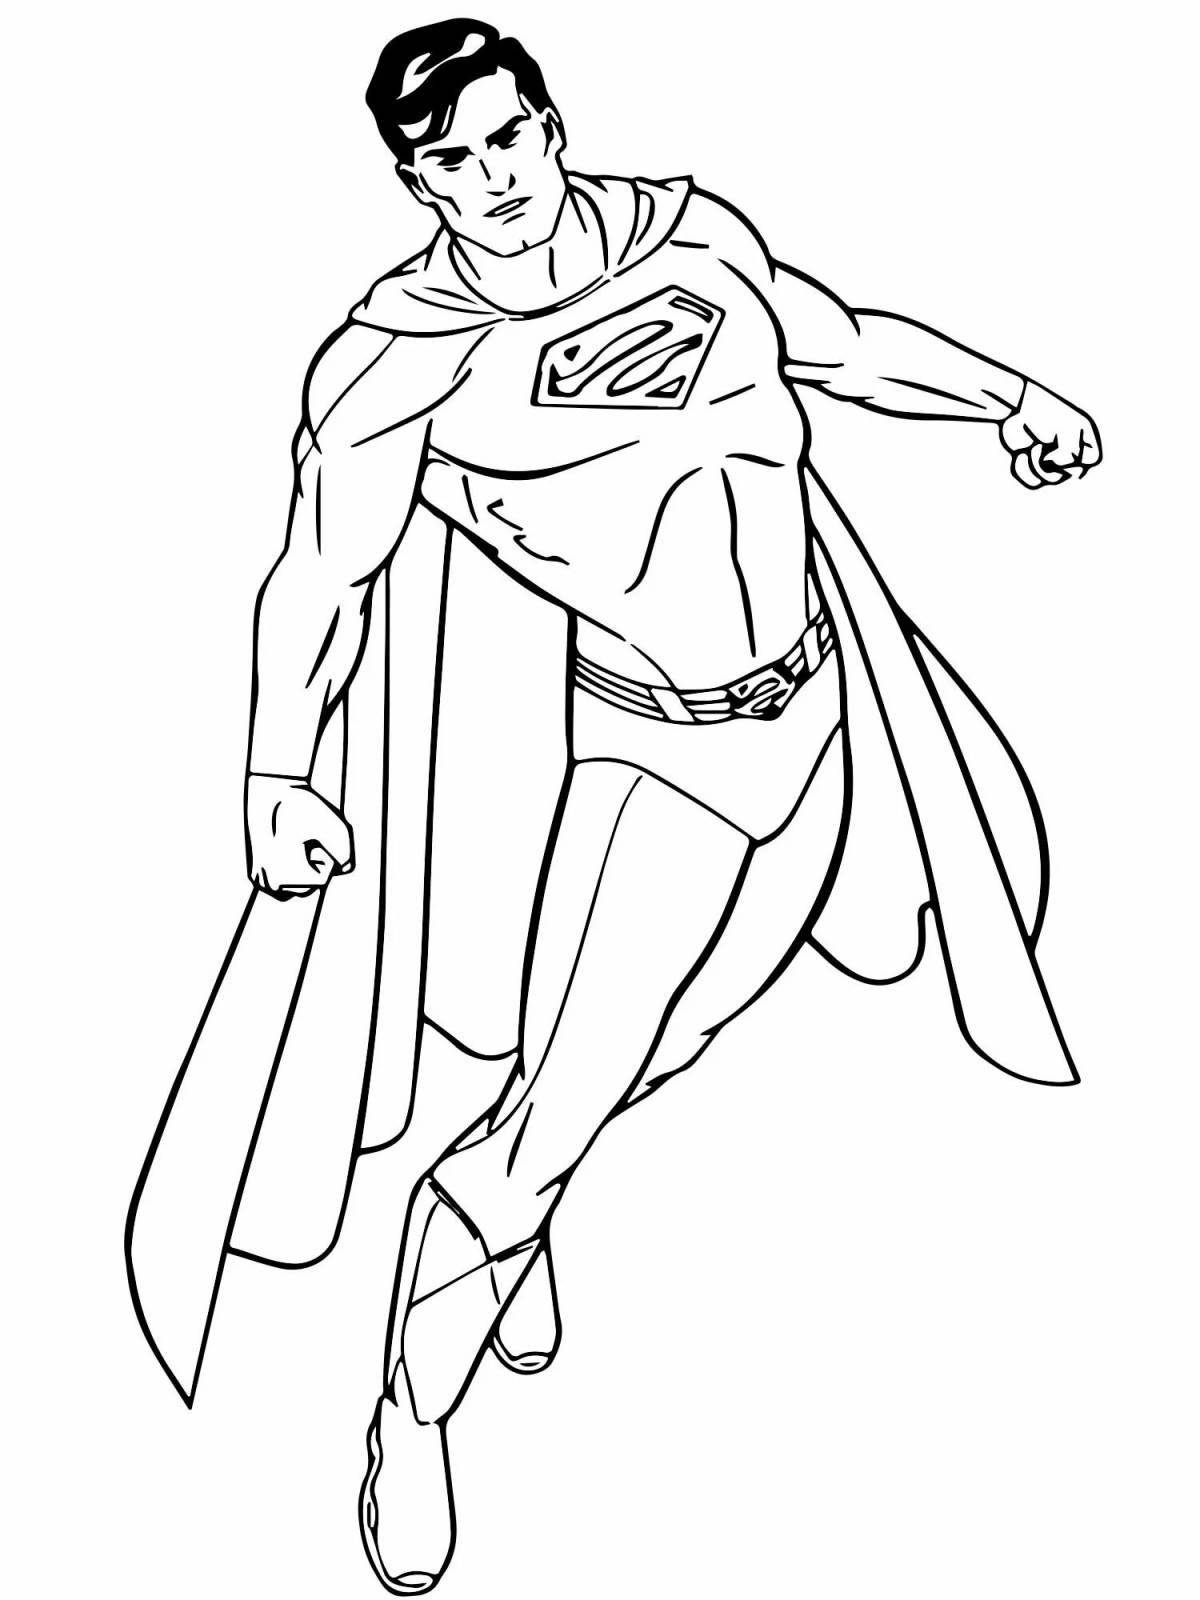 Boldly coloring superman